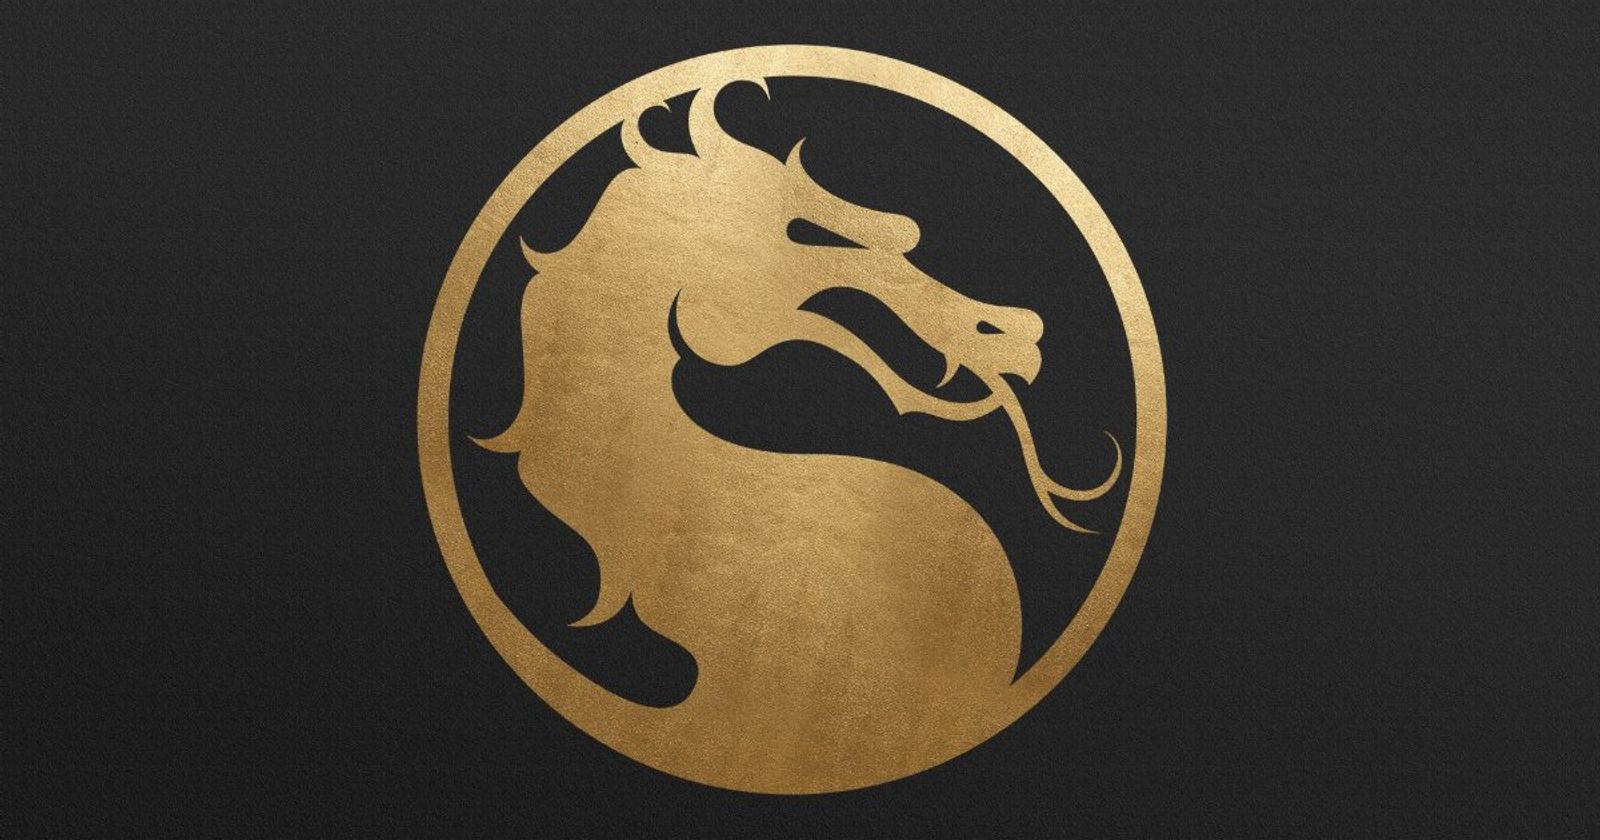 TheOneBeing on X: Now that the news of upcoming Mortal Kombat 12 have  supposedly leaked, who do you think will be on the cover of the game? And  who would you like